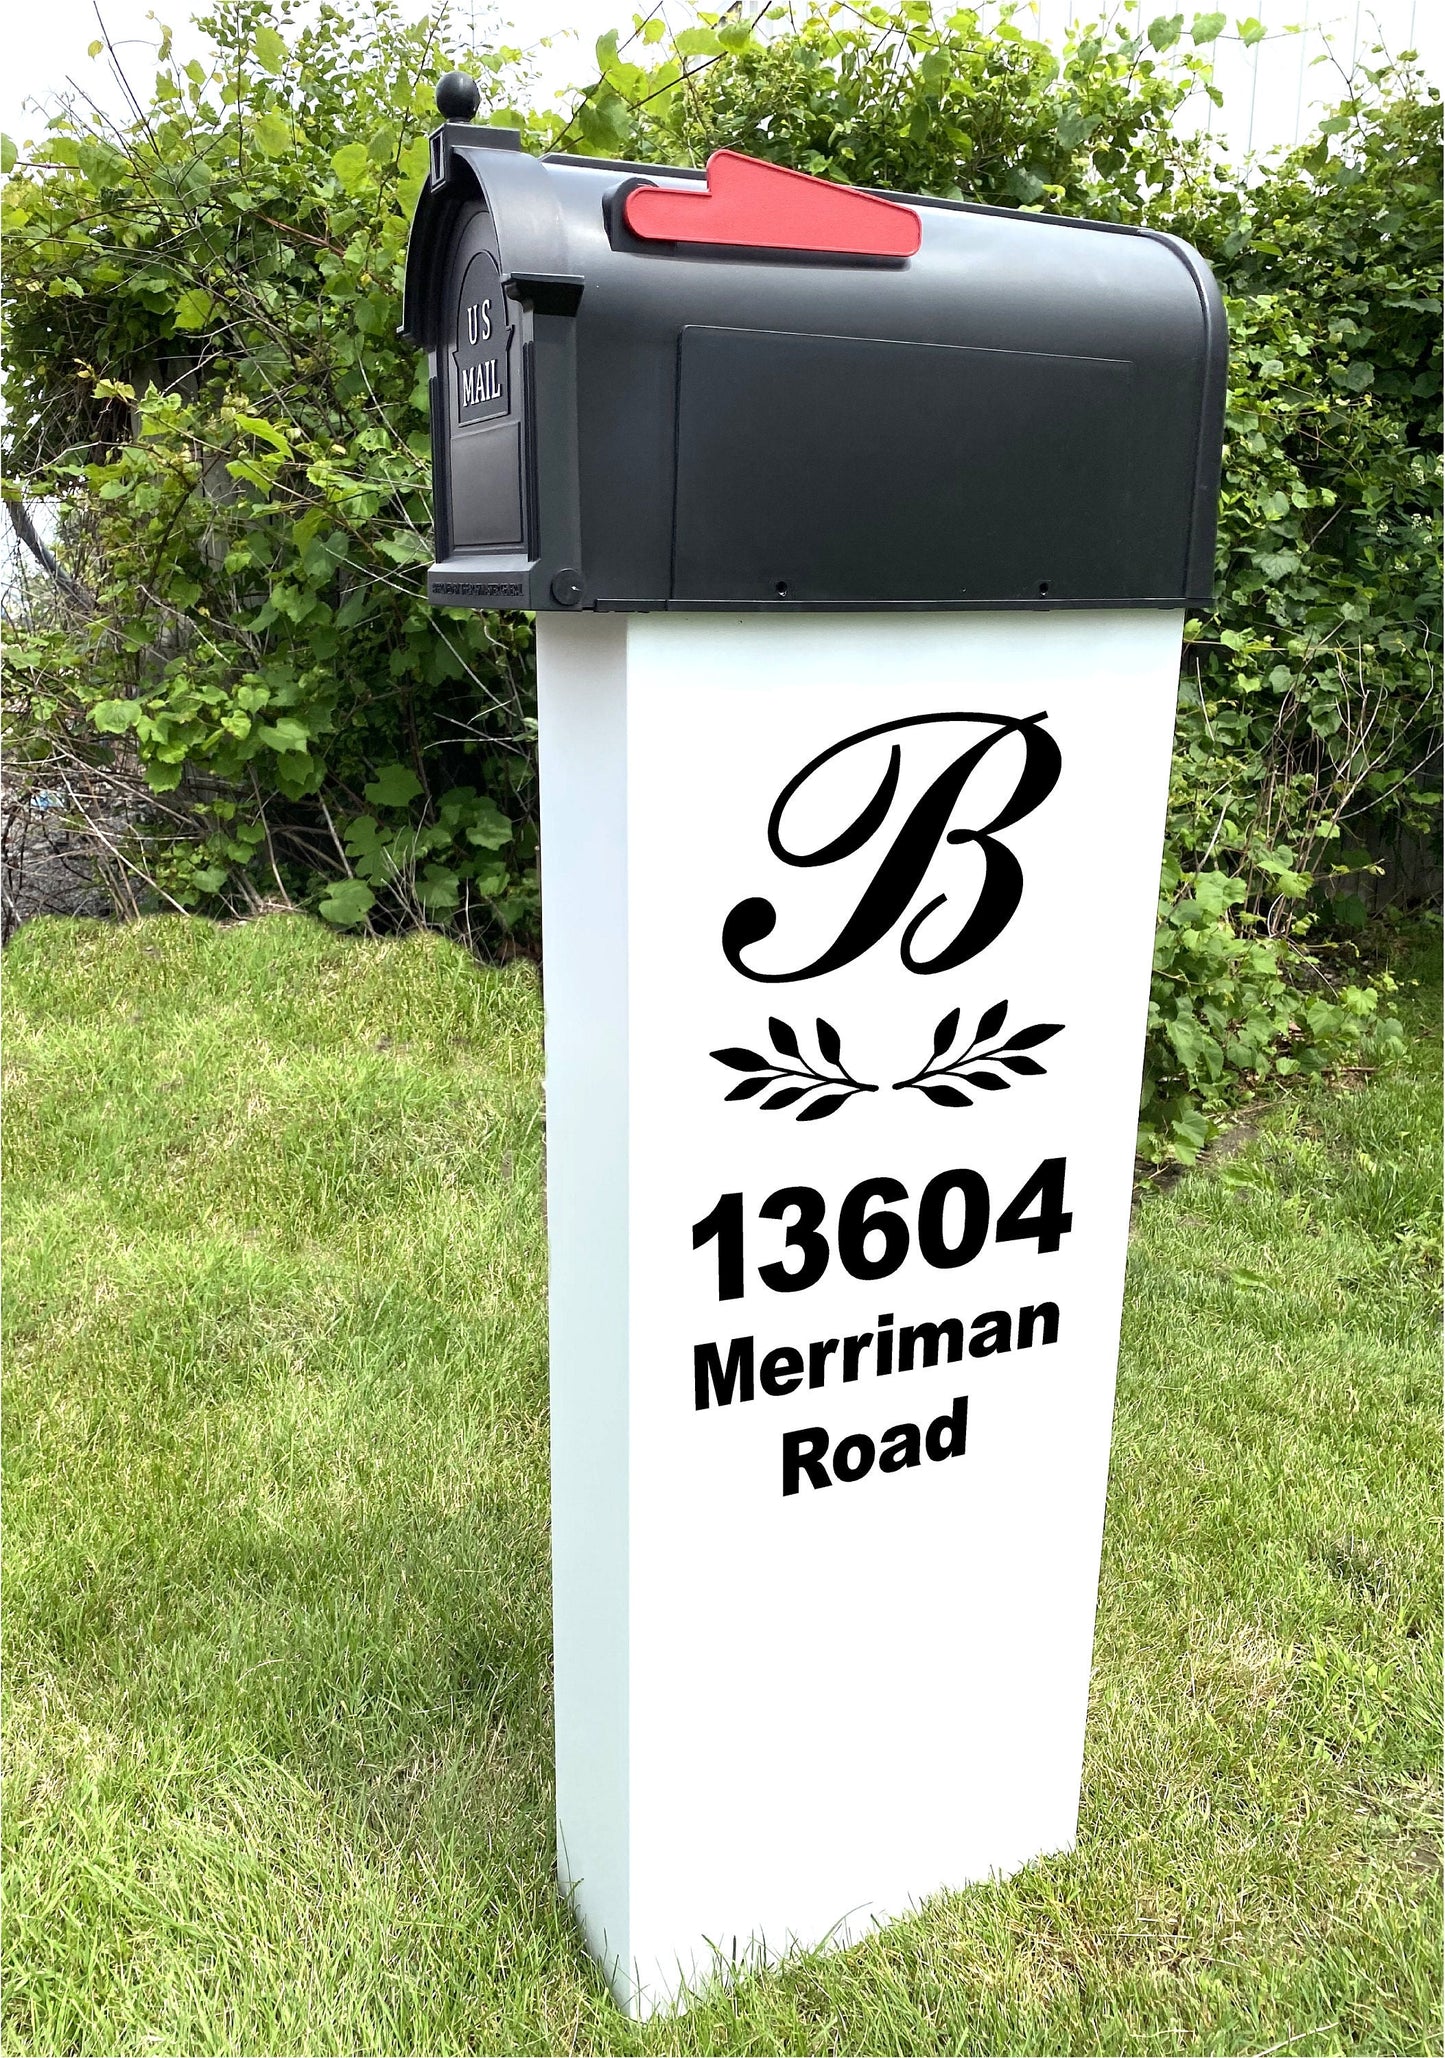 Mailbox and Mailbox Post, Personalized Address/Graphic, 3 baked on aluminum color outside finishes, 2 sided, Modern Column Style lasts years